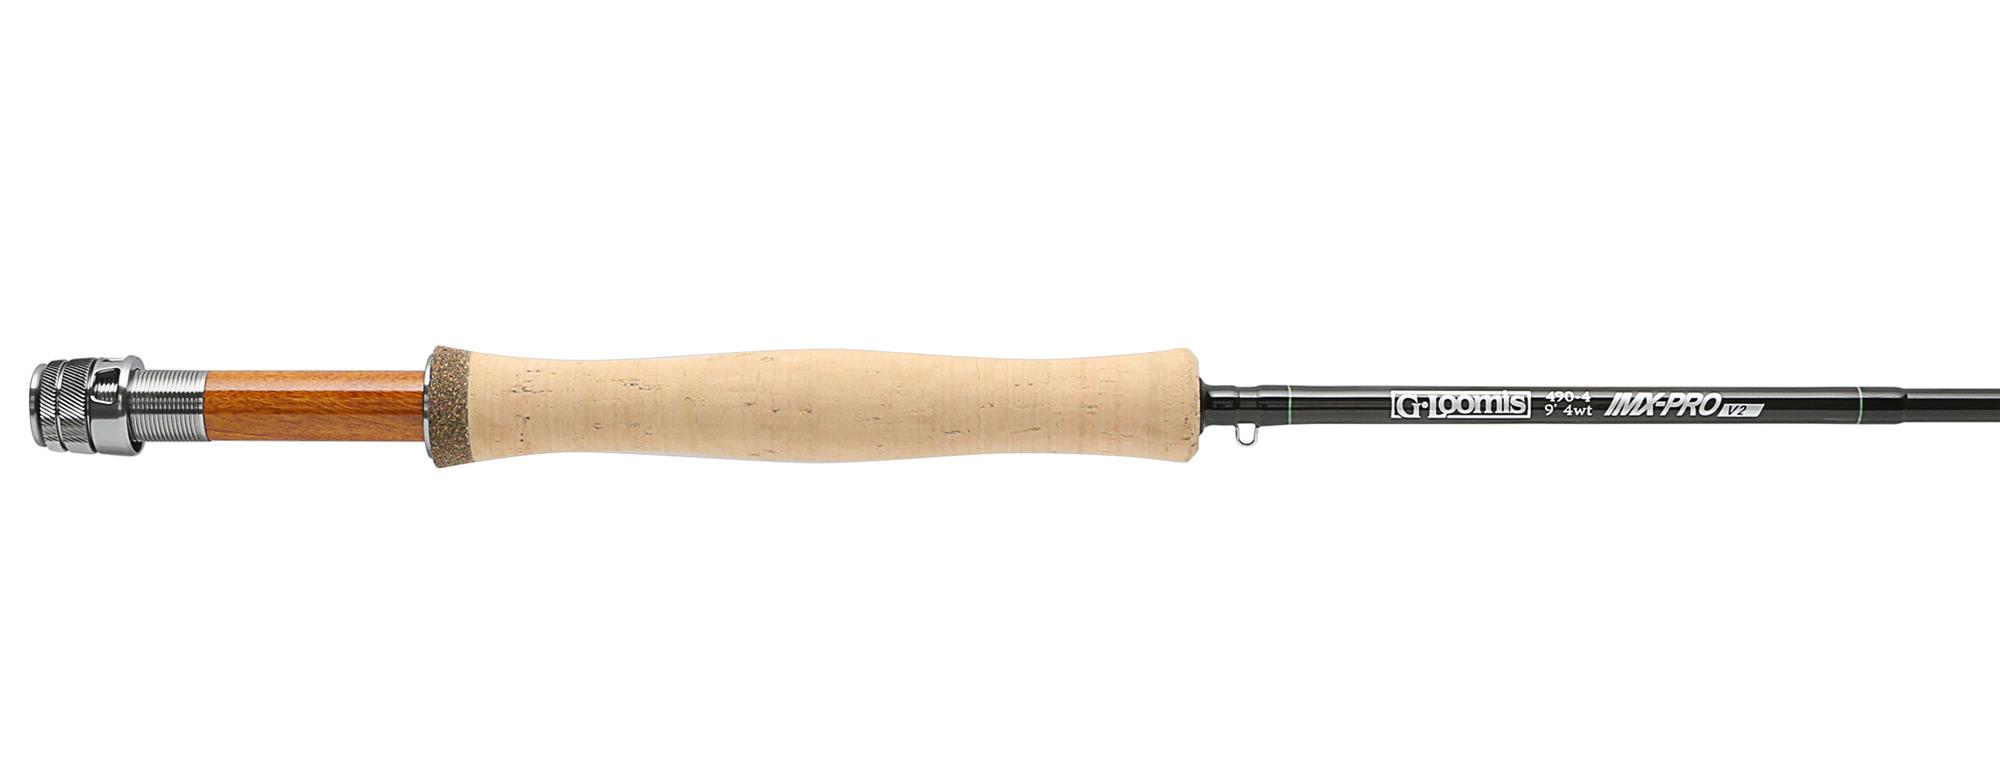 G. Loomis IMX-Pro V2 Fly Rod, featuring cutting-edge technology for enhanced casting control and sensitivity